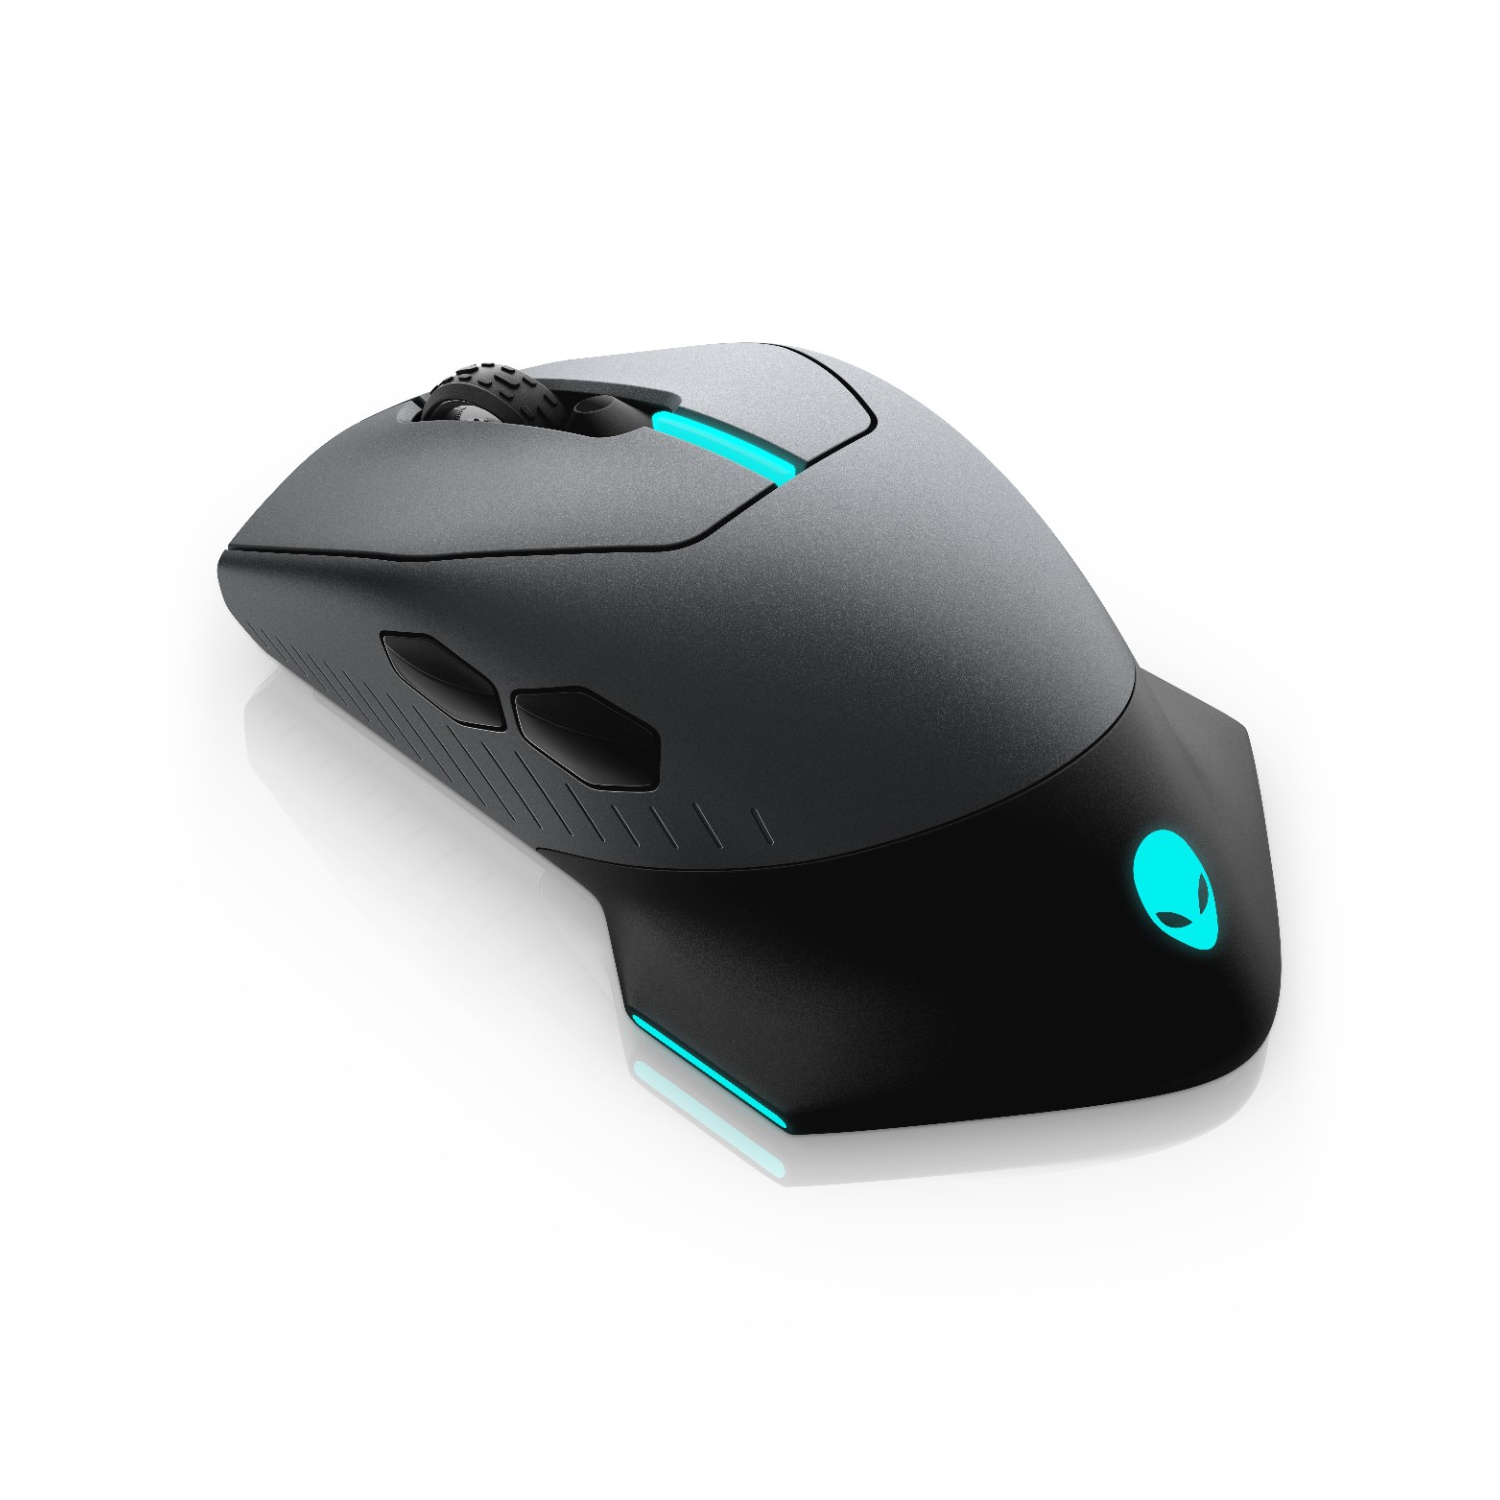 Alienware Wired/Wireless Gaming Mouse AW610M: 16000 DPI Optical Sensor - 350 Hour Rechargeable Battery Life - 7 Buttons - 3-Zone Alienfx RGB Lighting